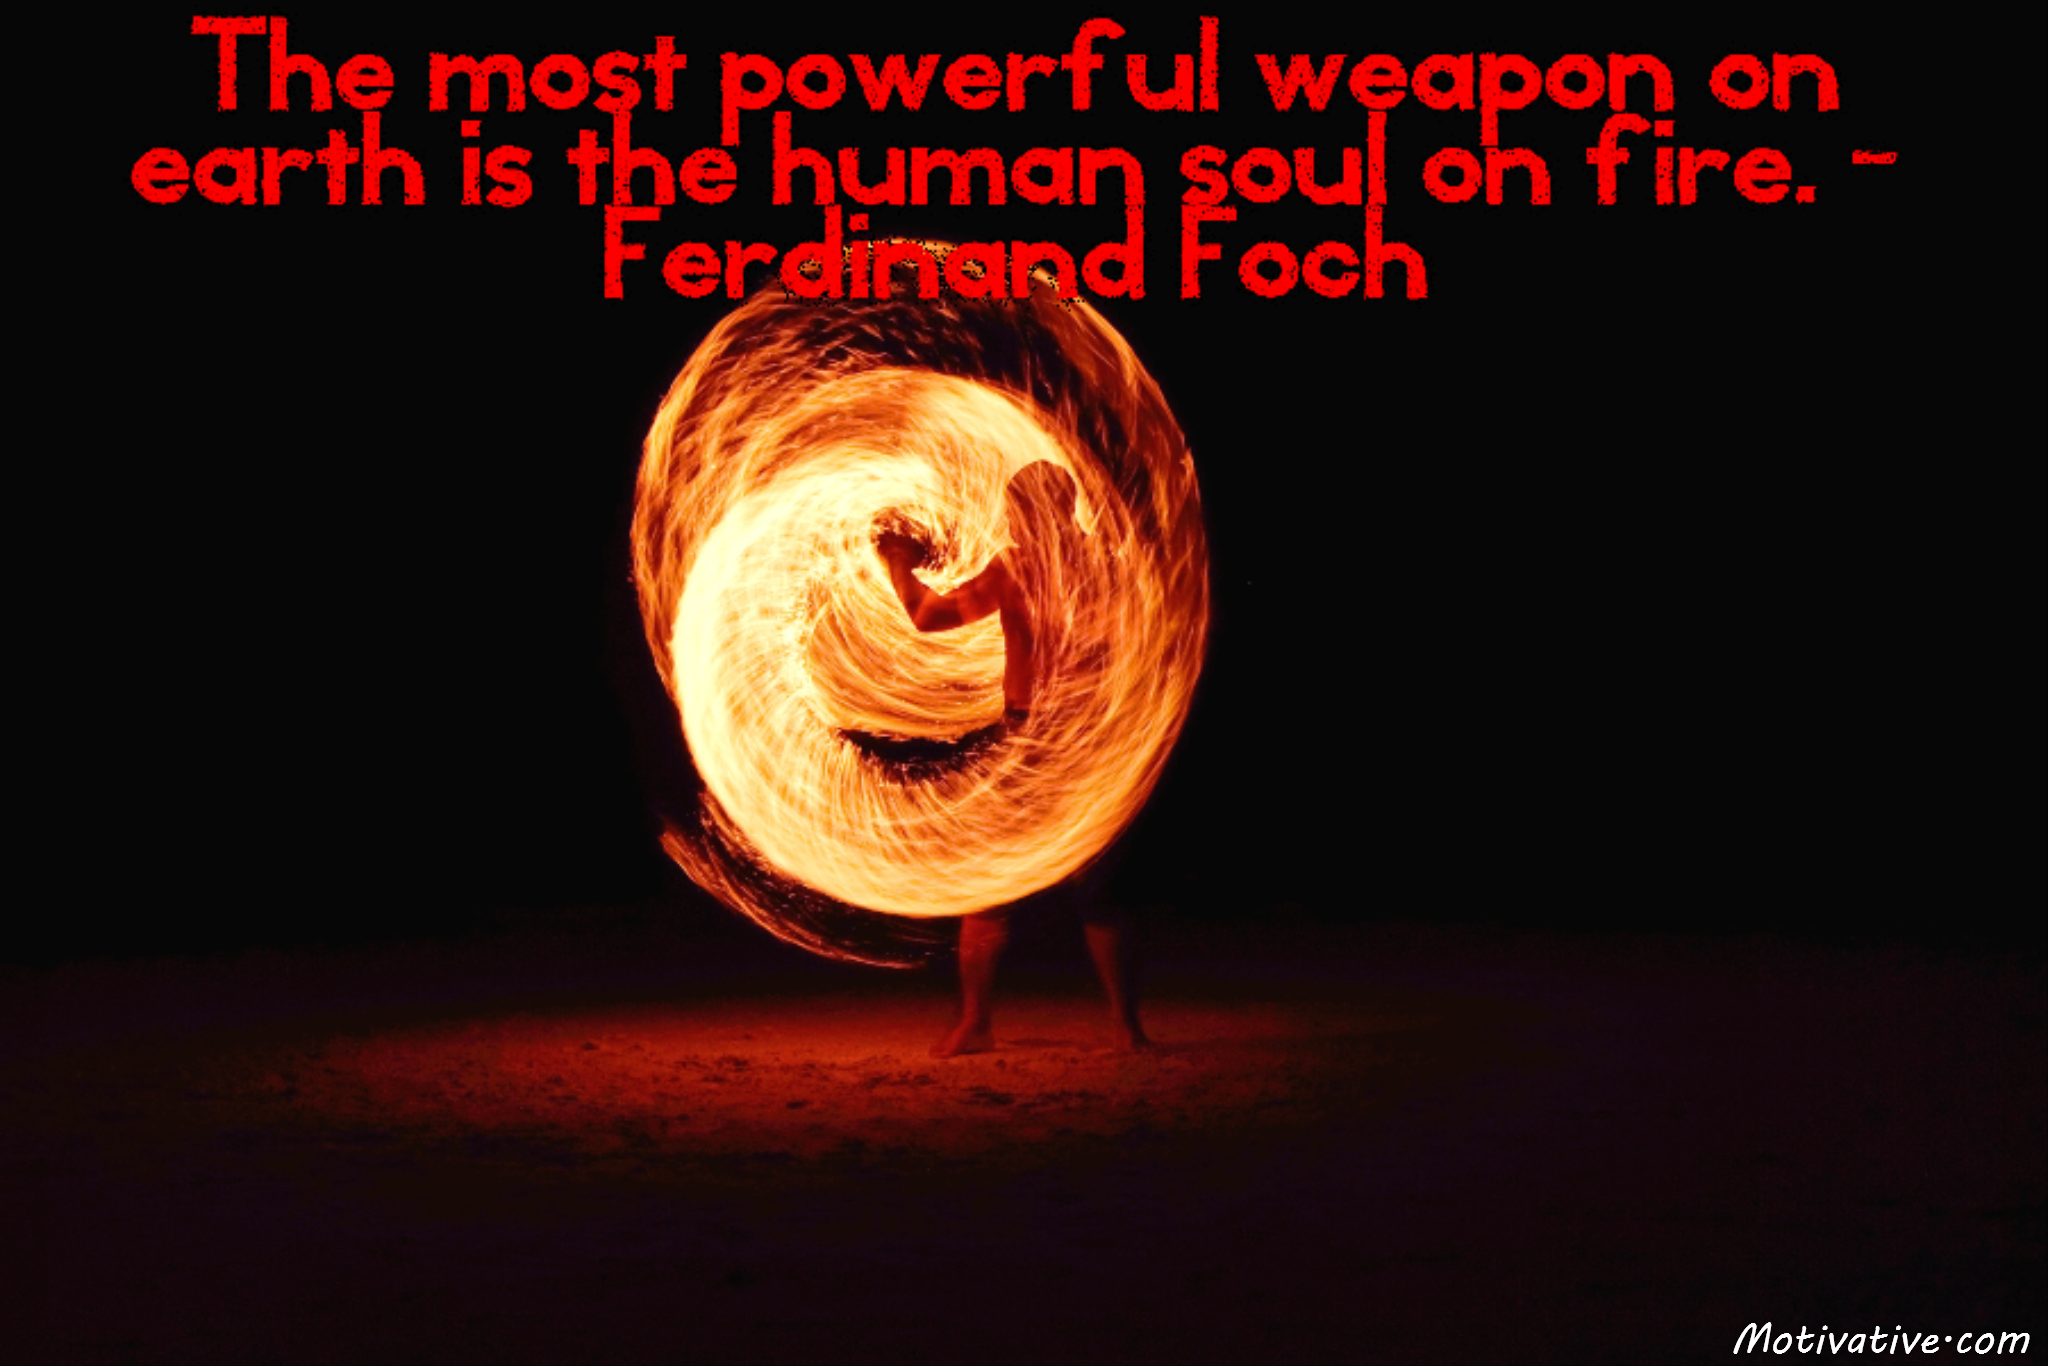 The most powerful weapon on earth is the human soul on fire. – Ferdinand Foch